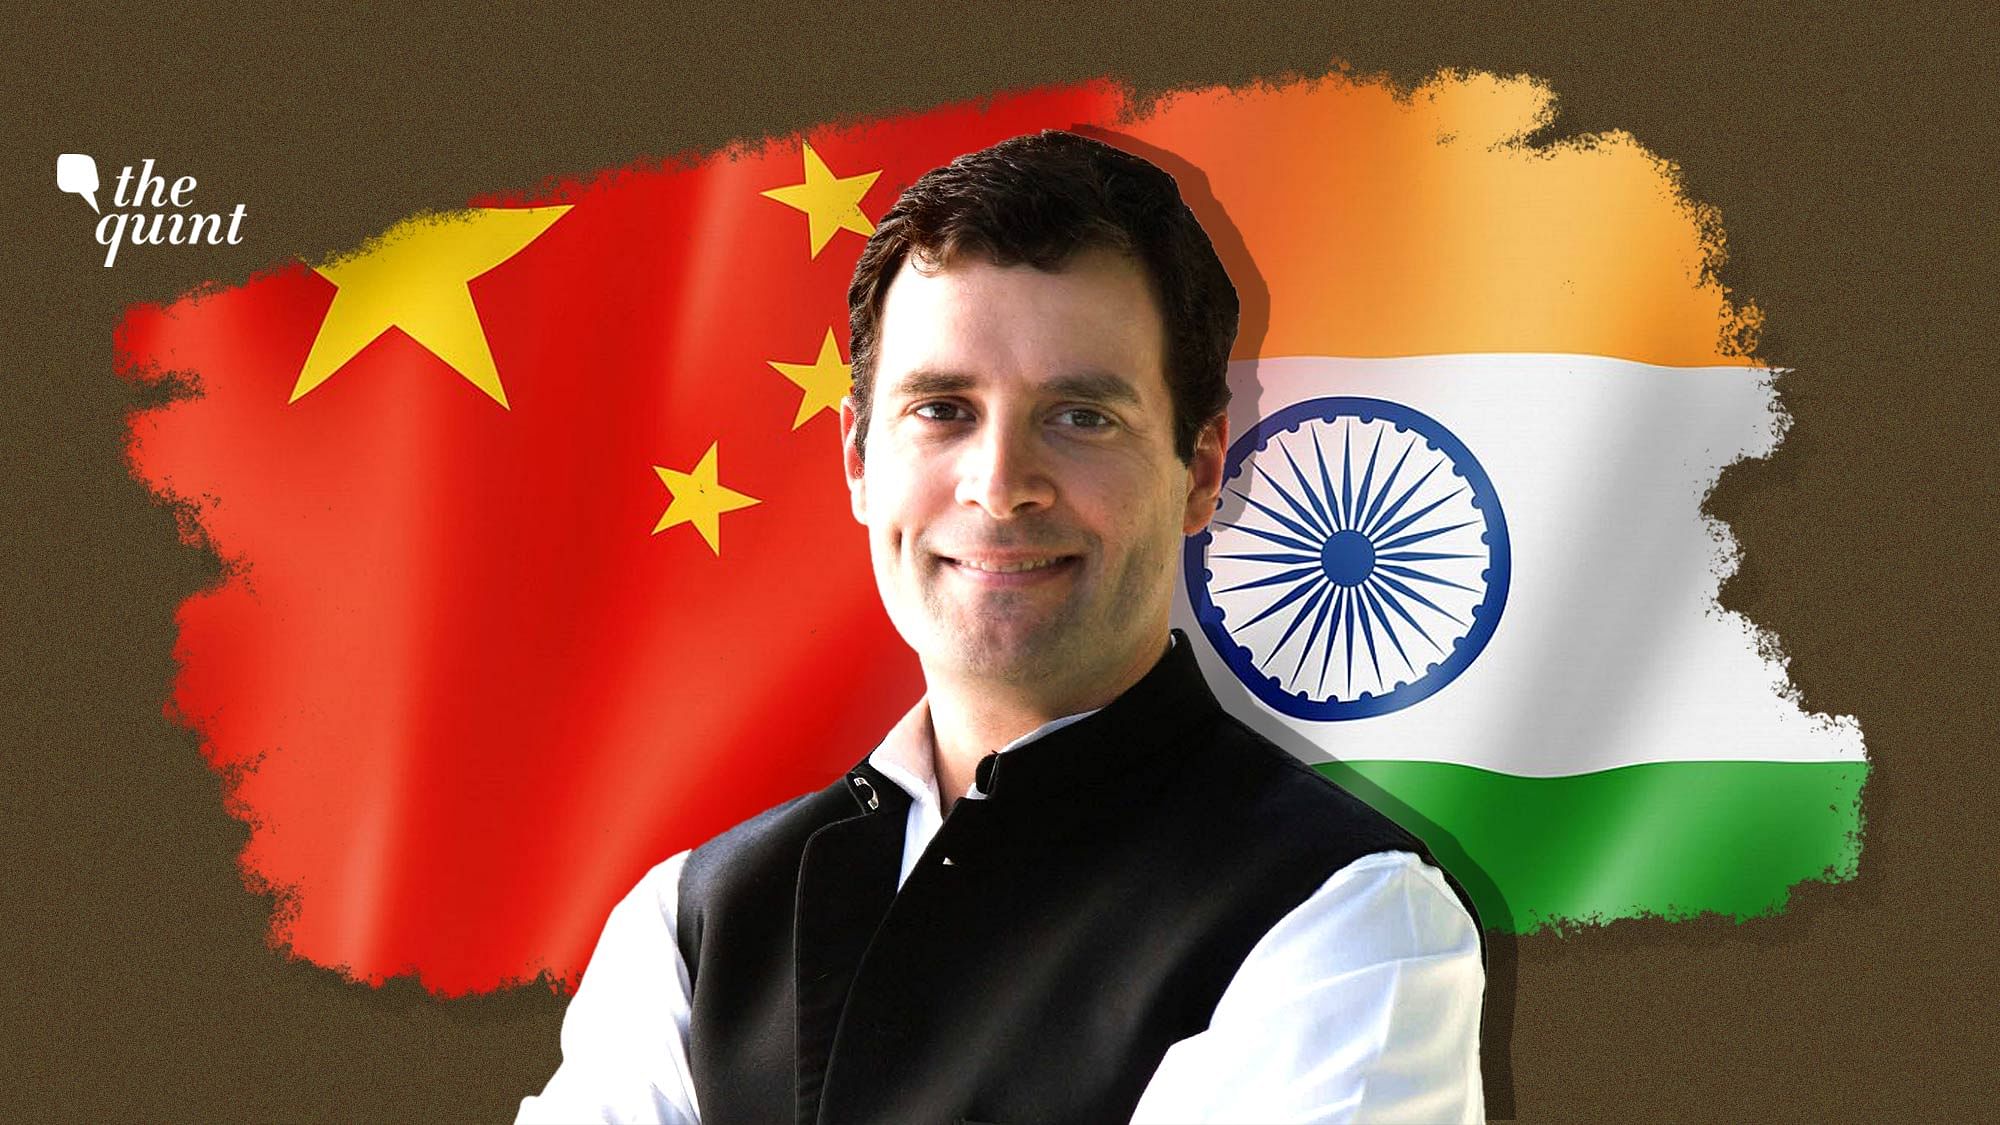 Image of Rahul Gandhi and India and China flags used for representational purposes.